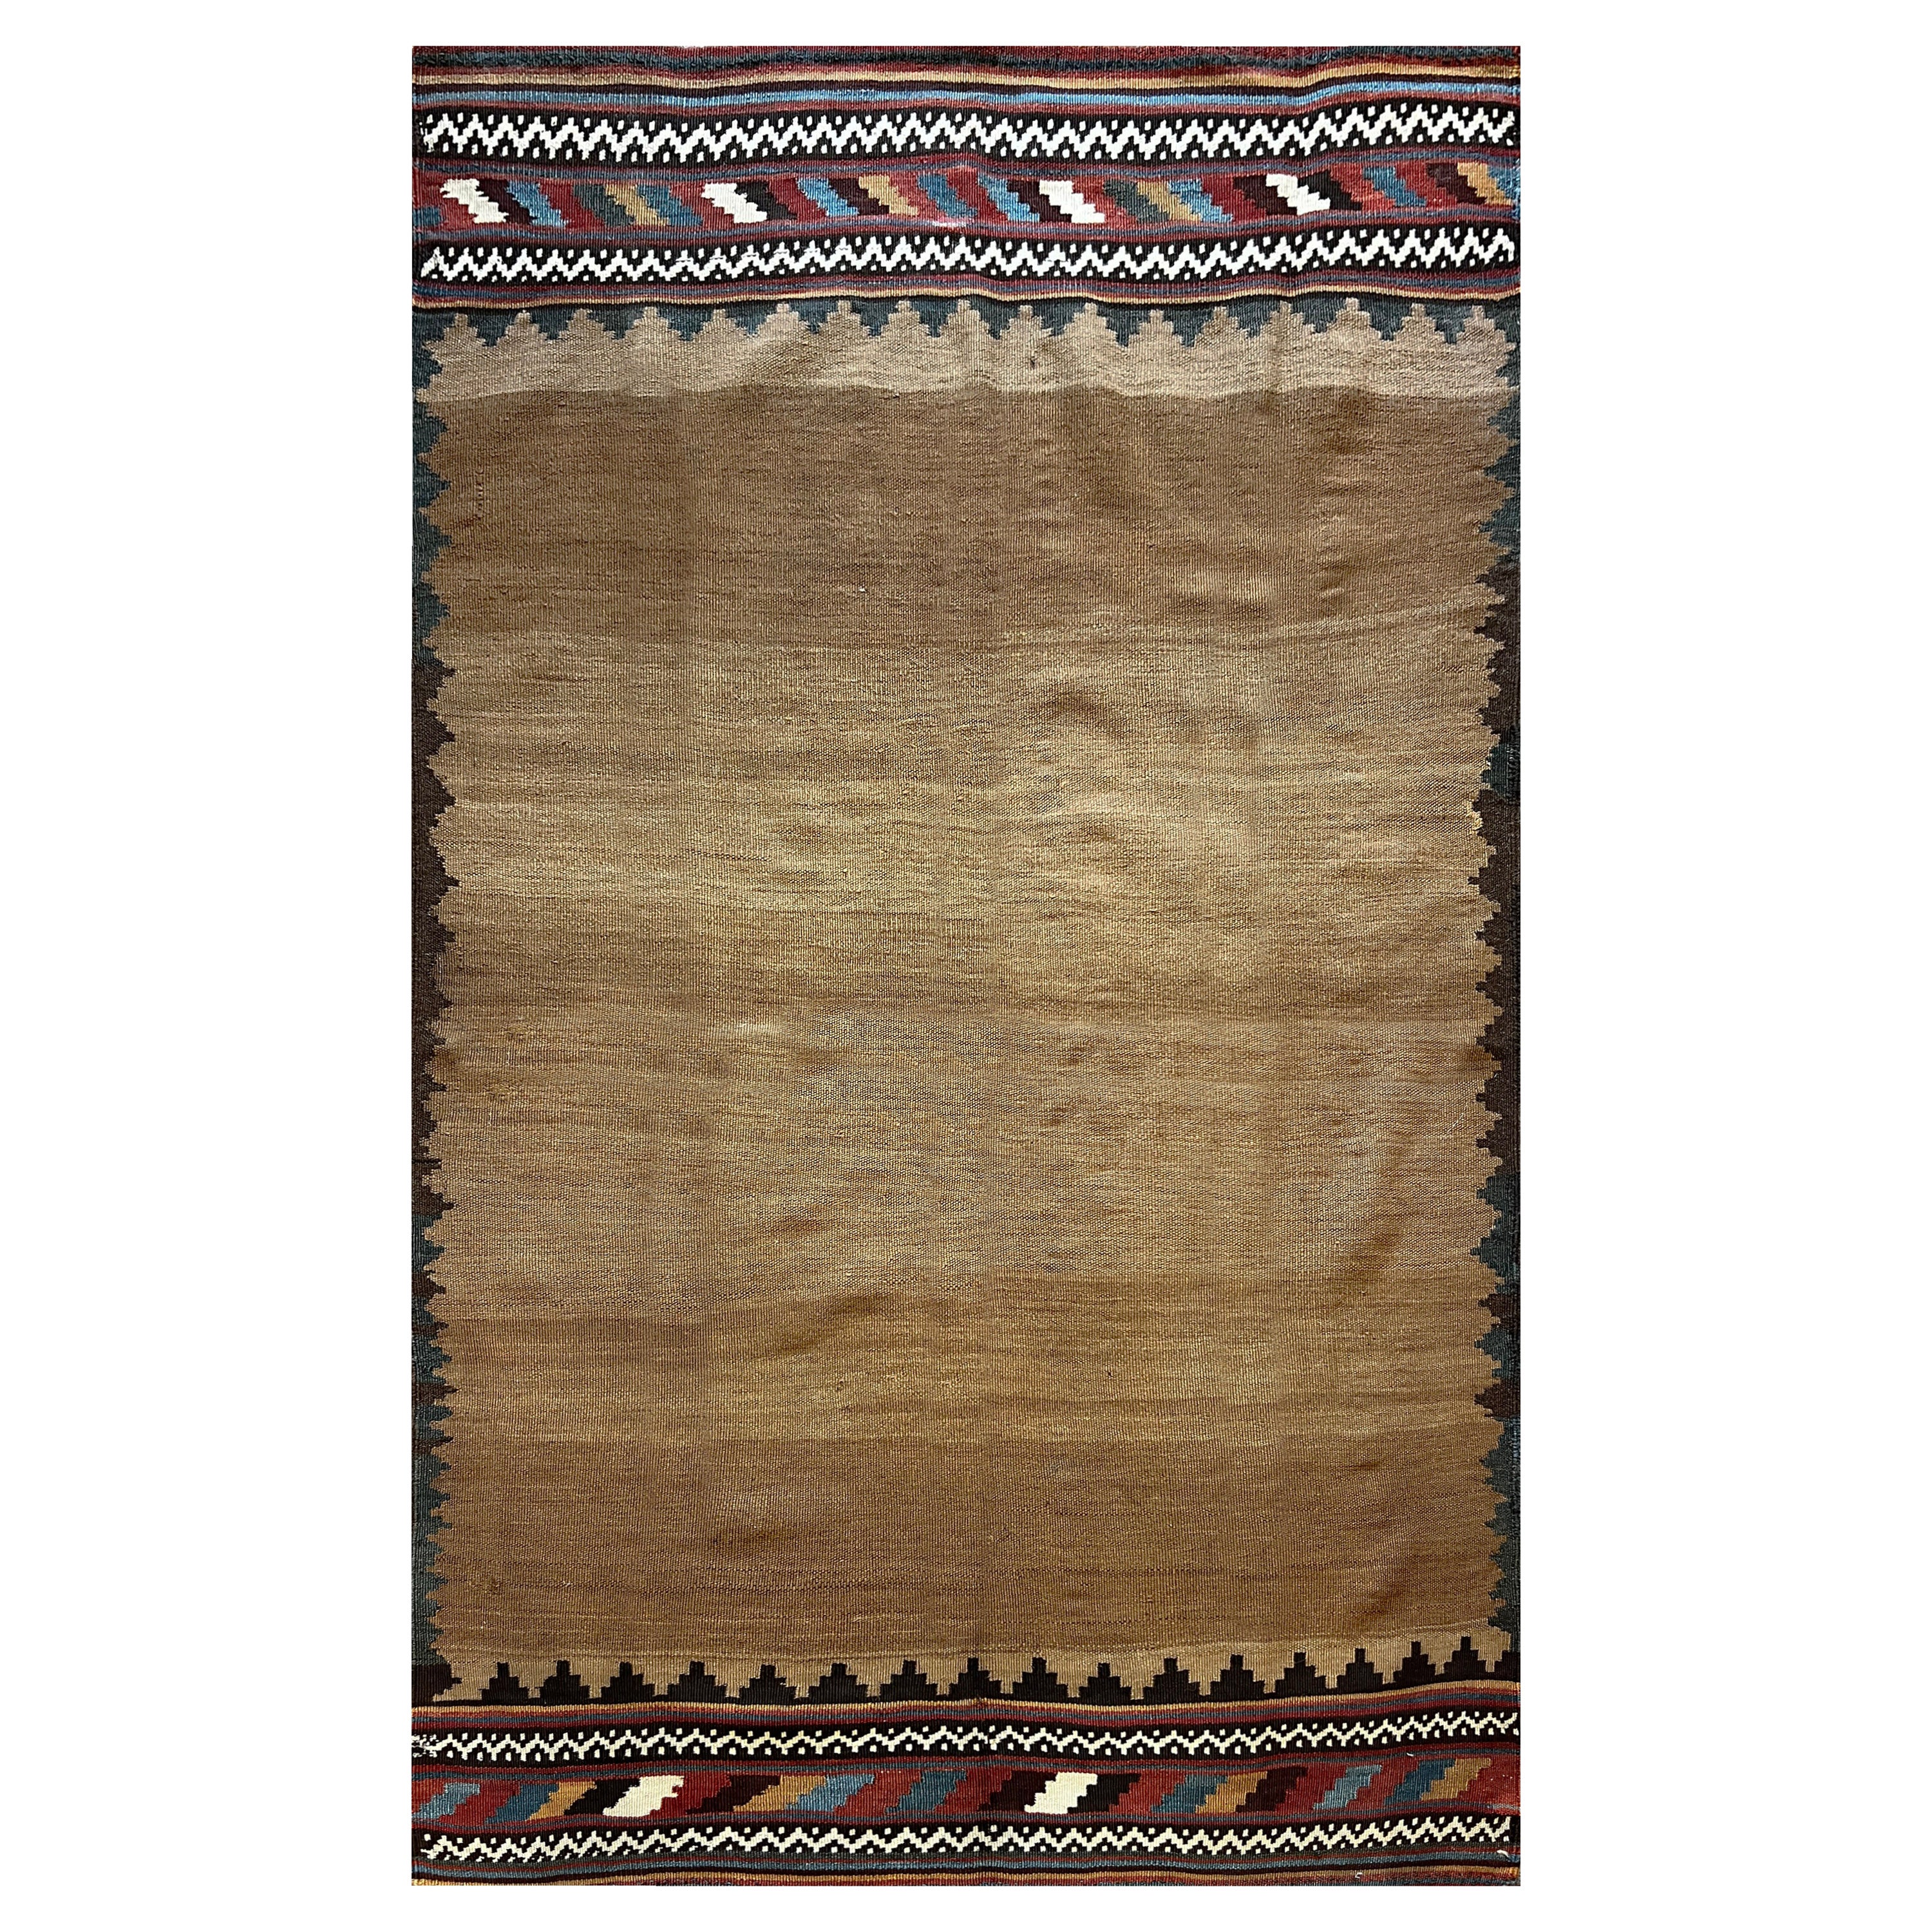 Sofreh Kilim Rug 19th Century - 165x120 - No. 702 For Sale